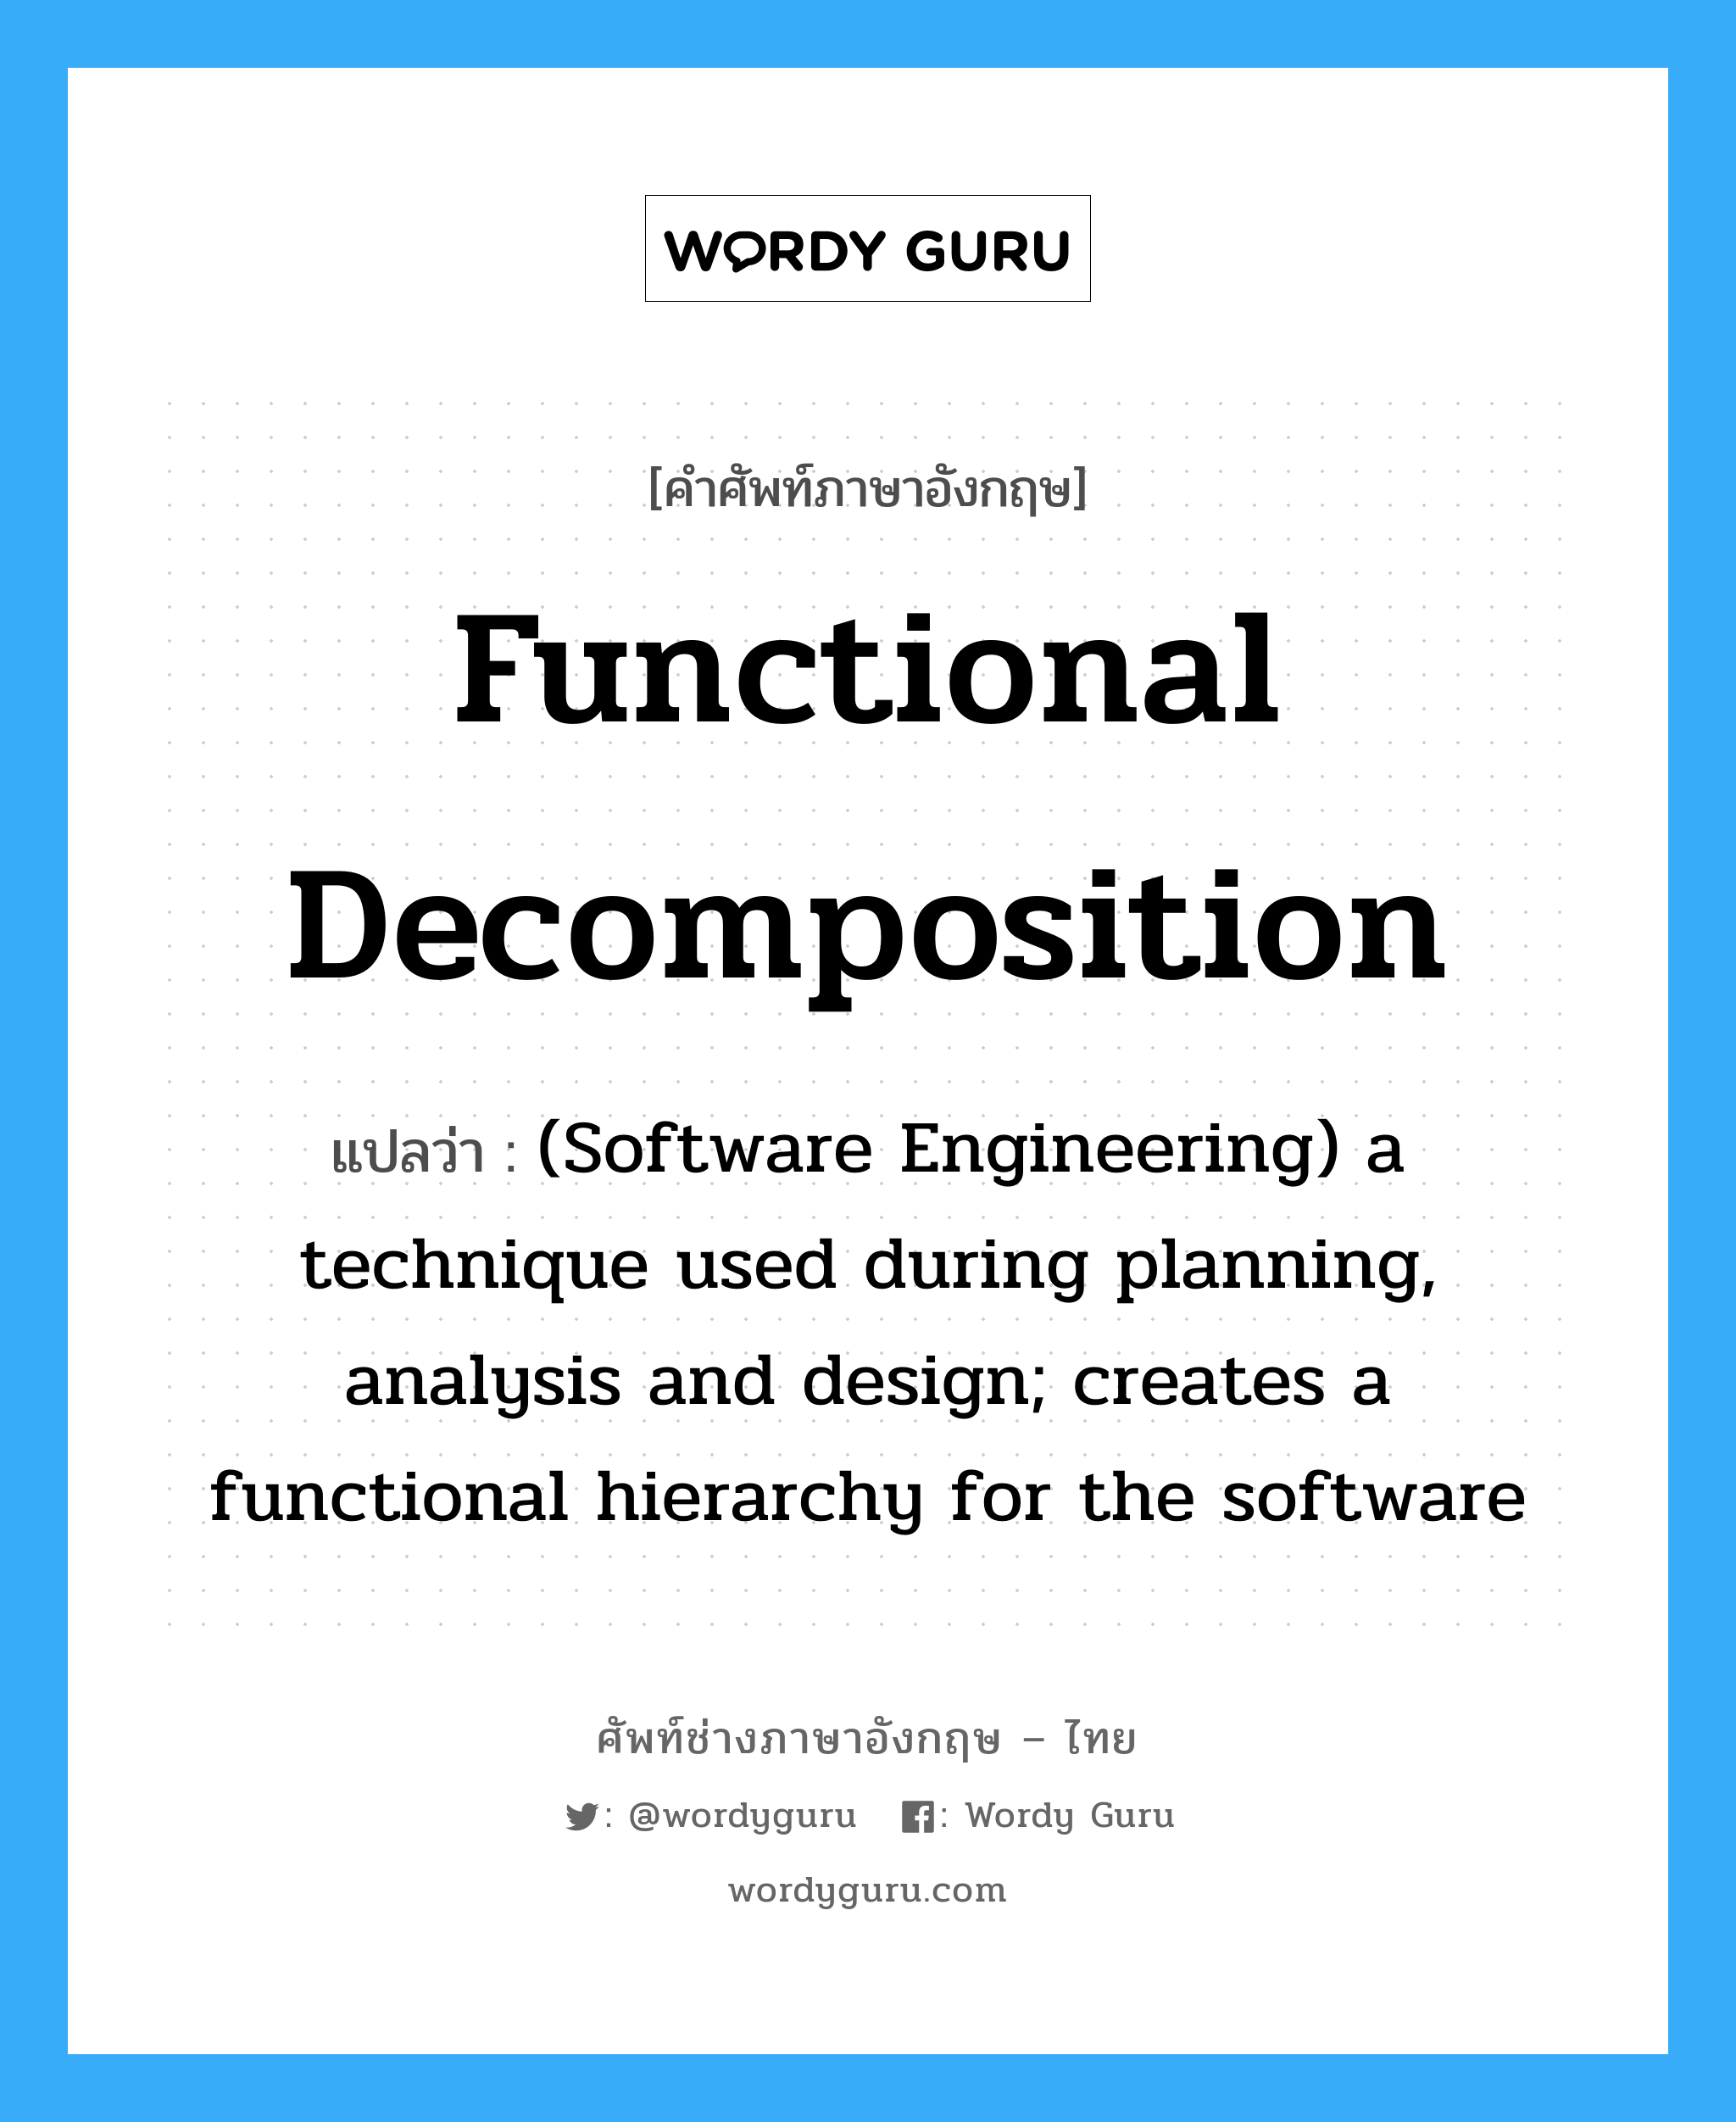 Functional decomposition แปลว่า?, คำศัพท์ช่างภาษาอังกฤษ - ไทย Functional decomposition คำศัพท์ภาษาอังกฤษ Functional decomposition แปลว่า (Software Engineering) a technique used during planning, analysis and design; creates a functional hierarchy for the software